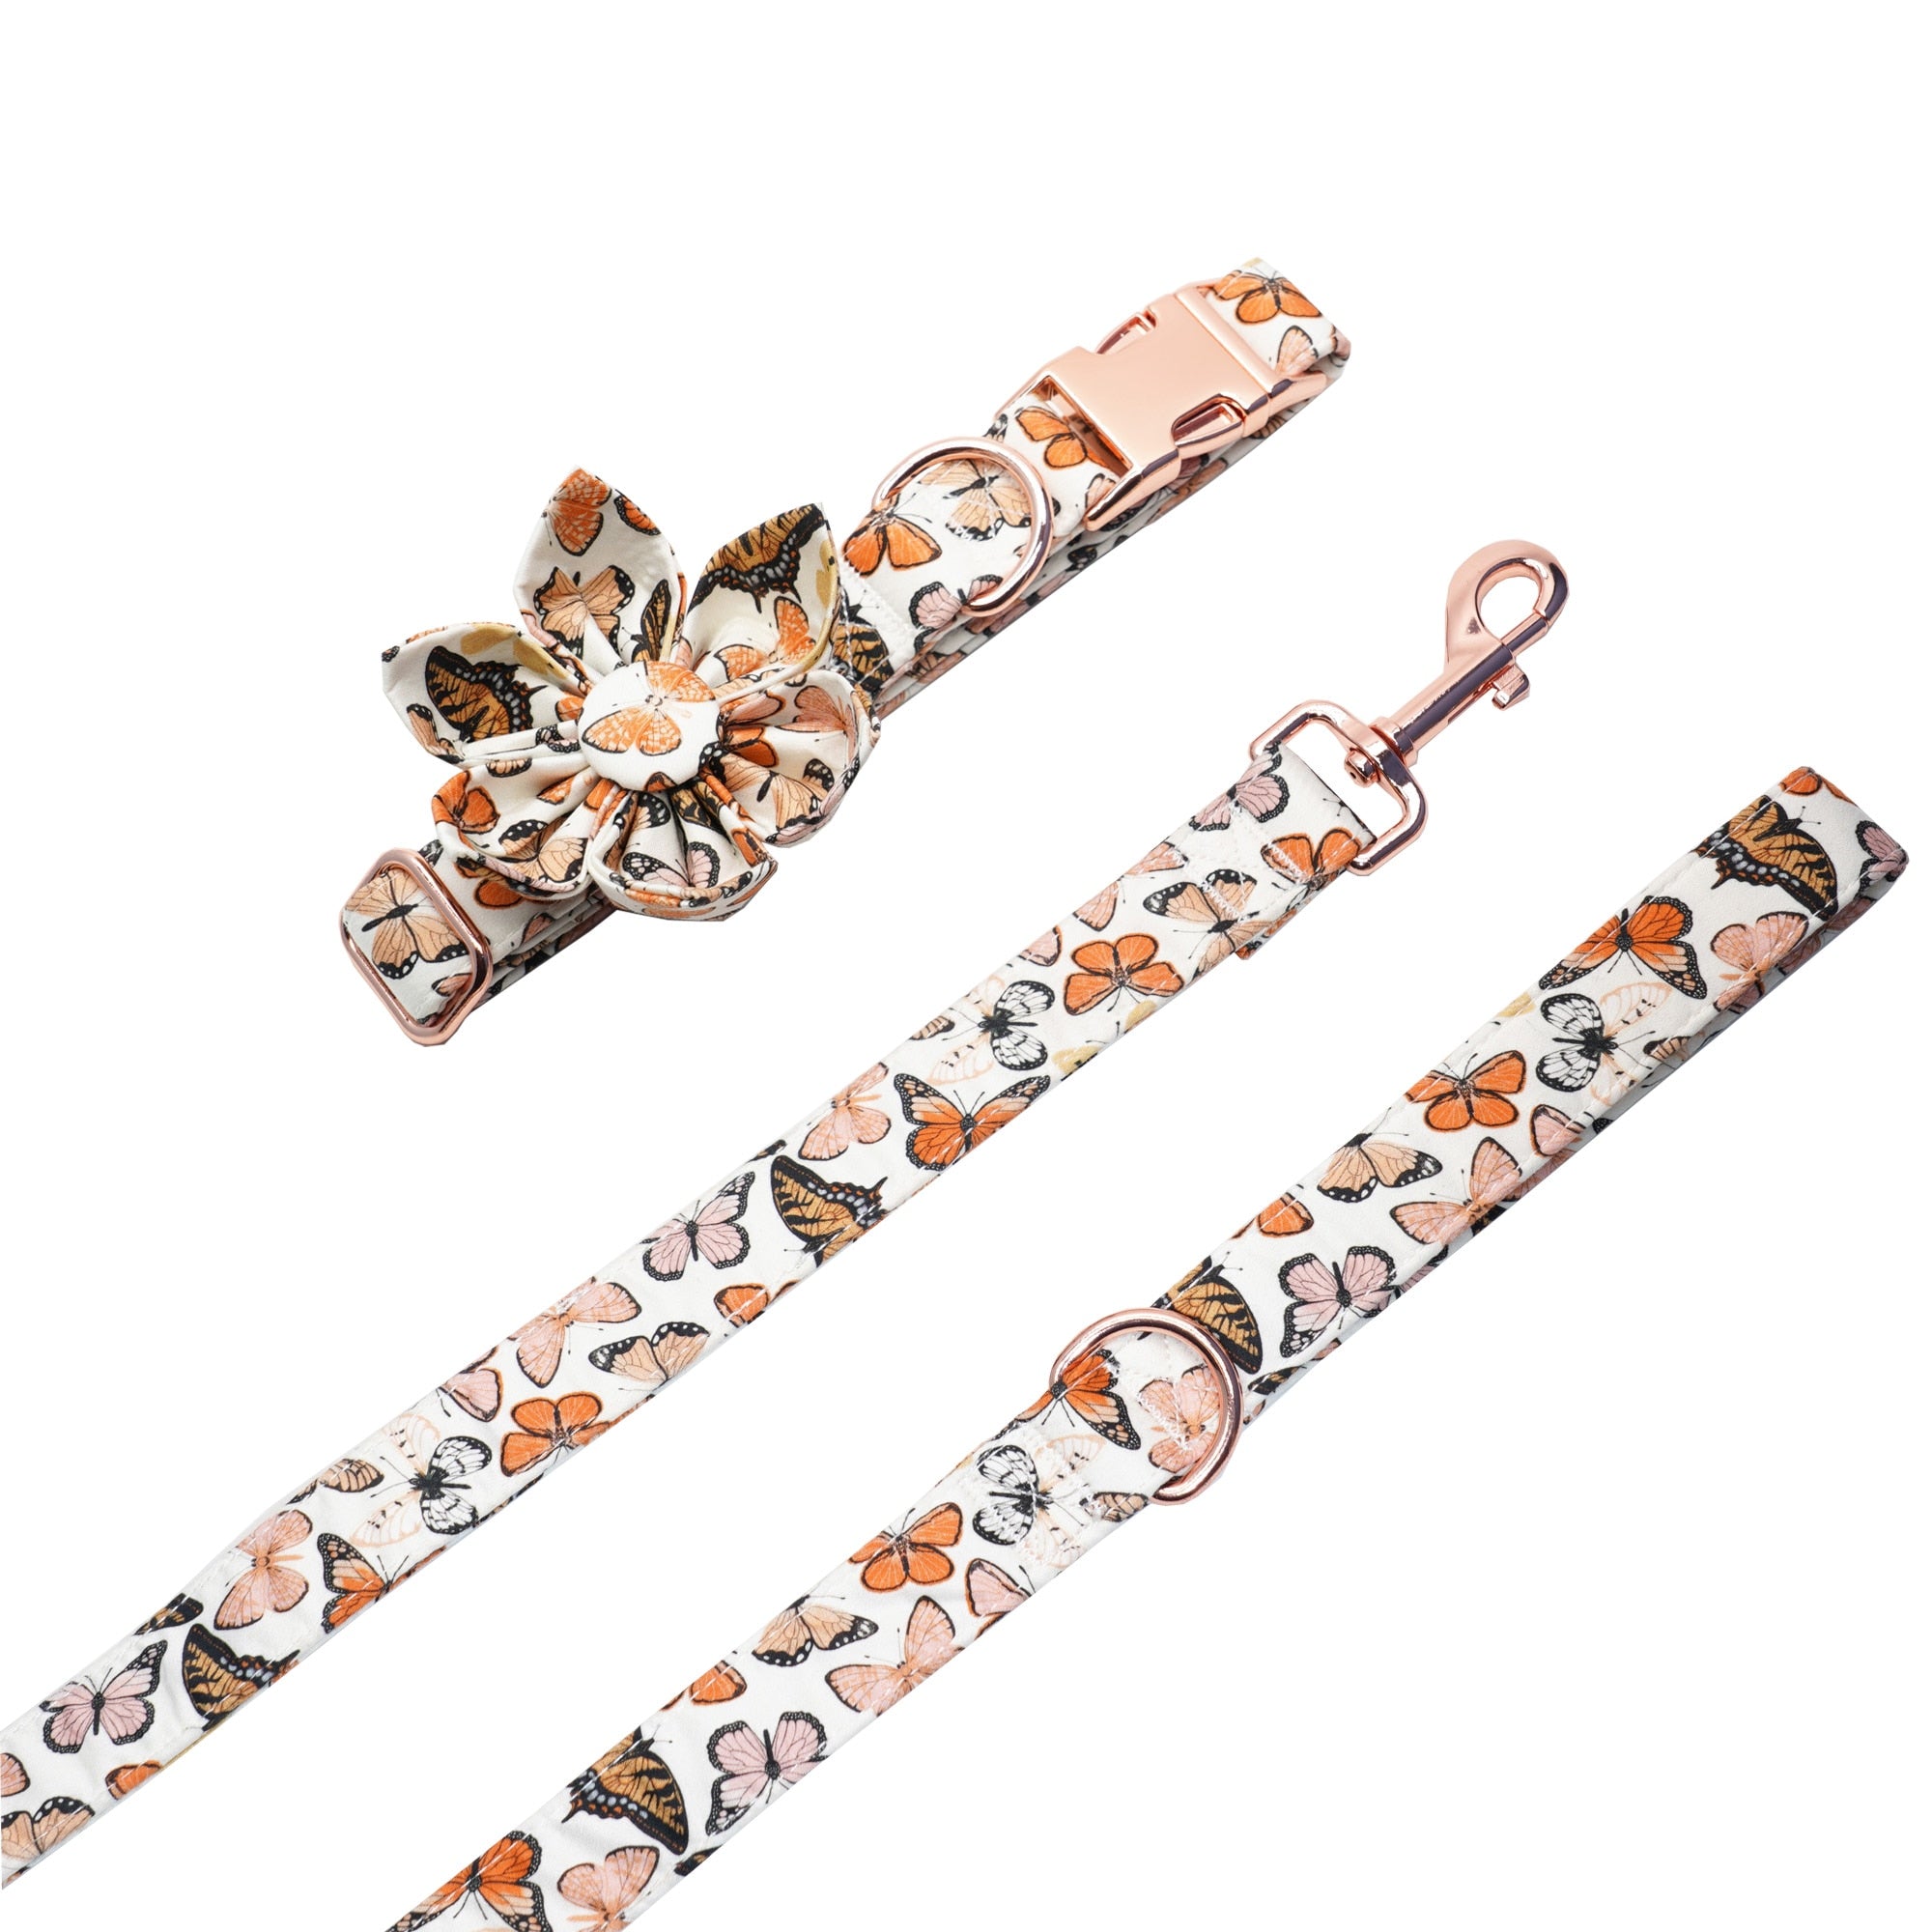 Breezy Butterflies Set: Personalized Flower Collar/Bow collar, Harness, Leash, Poopbag, And Bandana. - CurliTail